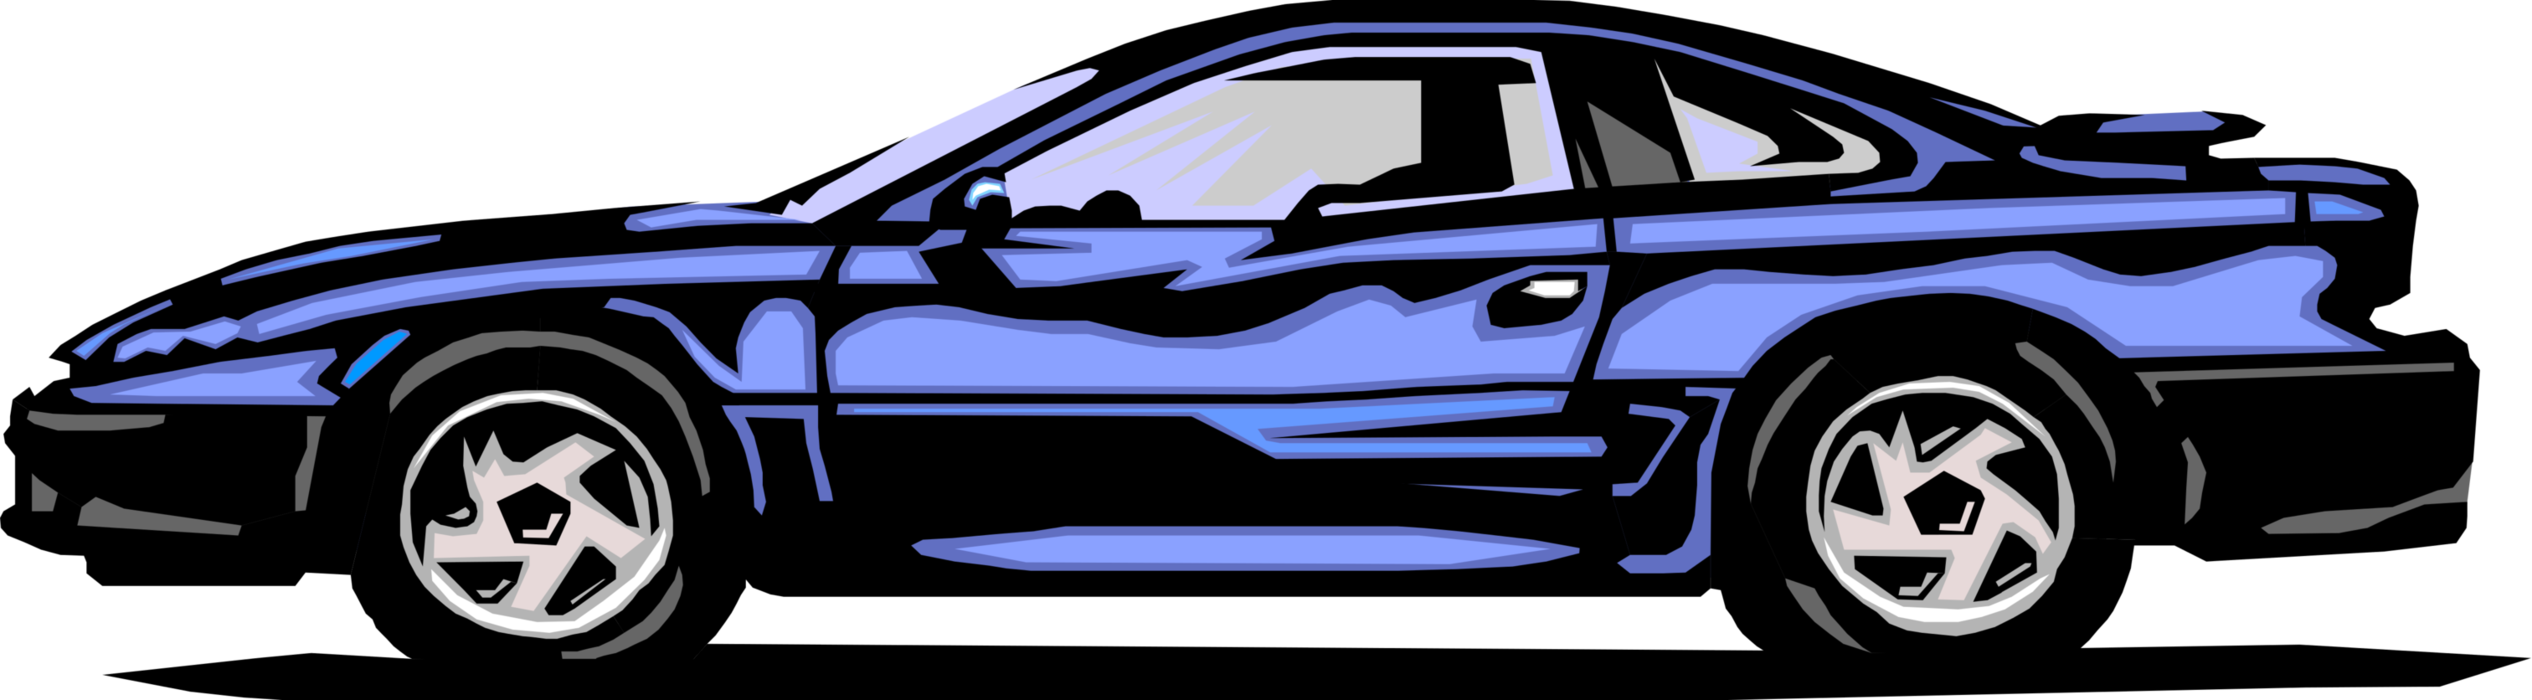 Vector Illustration of Sports Car Automobile Motor Vehicle 